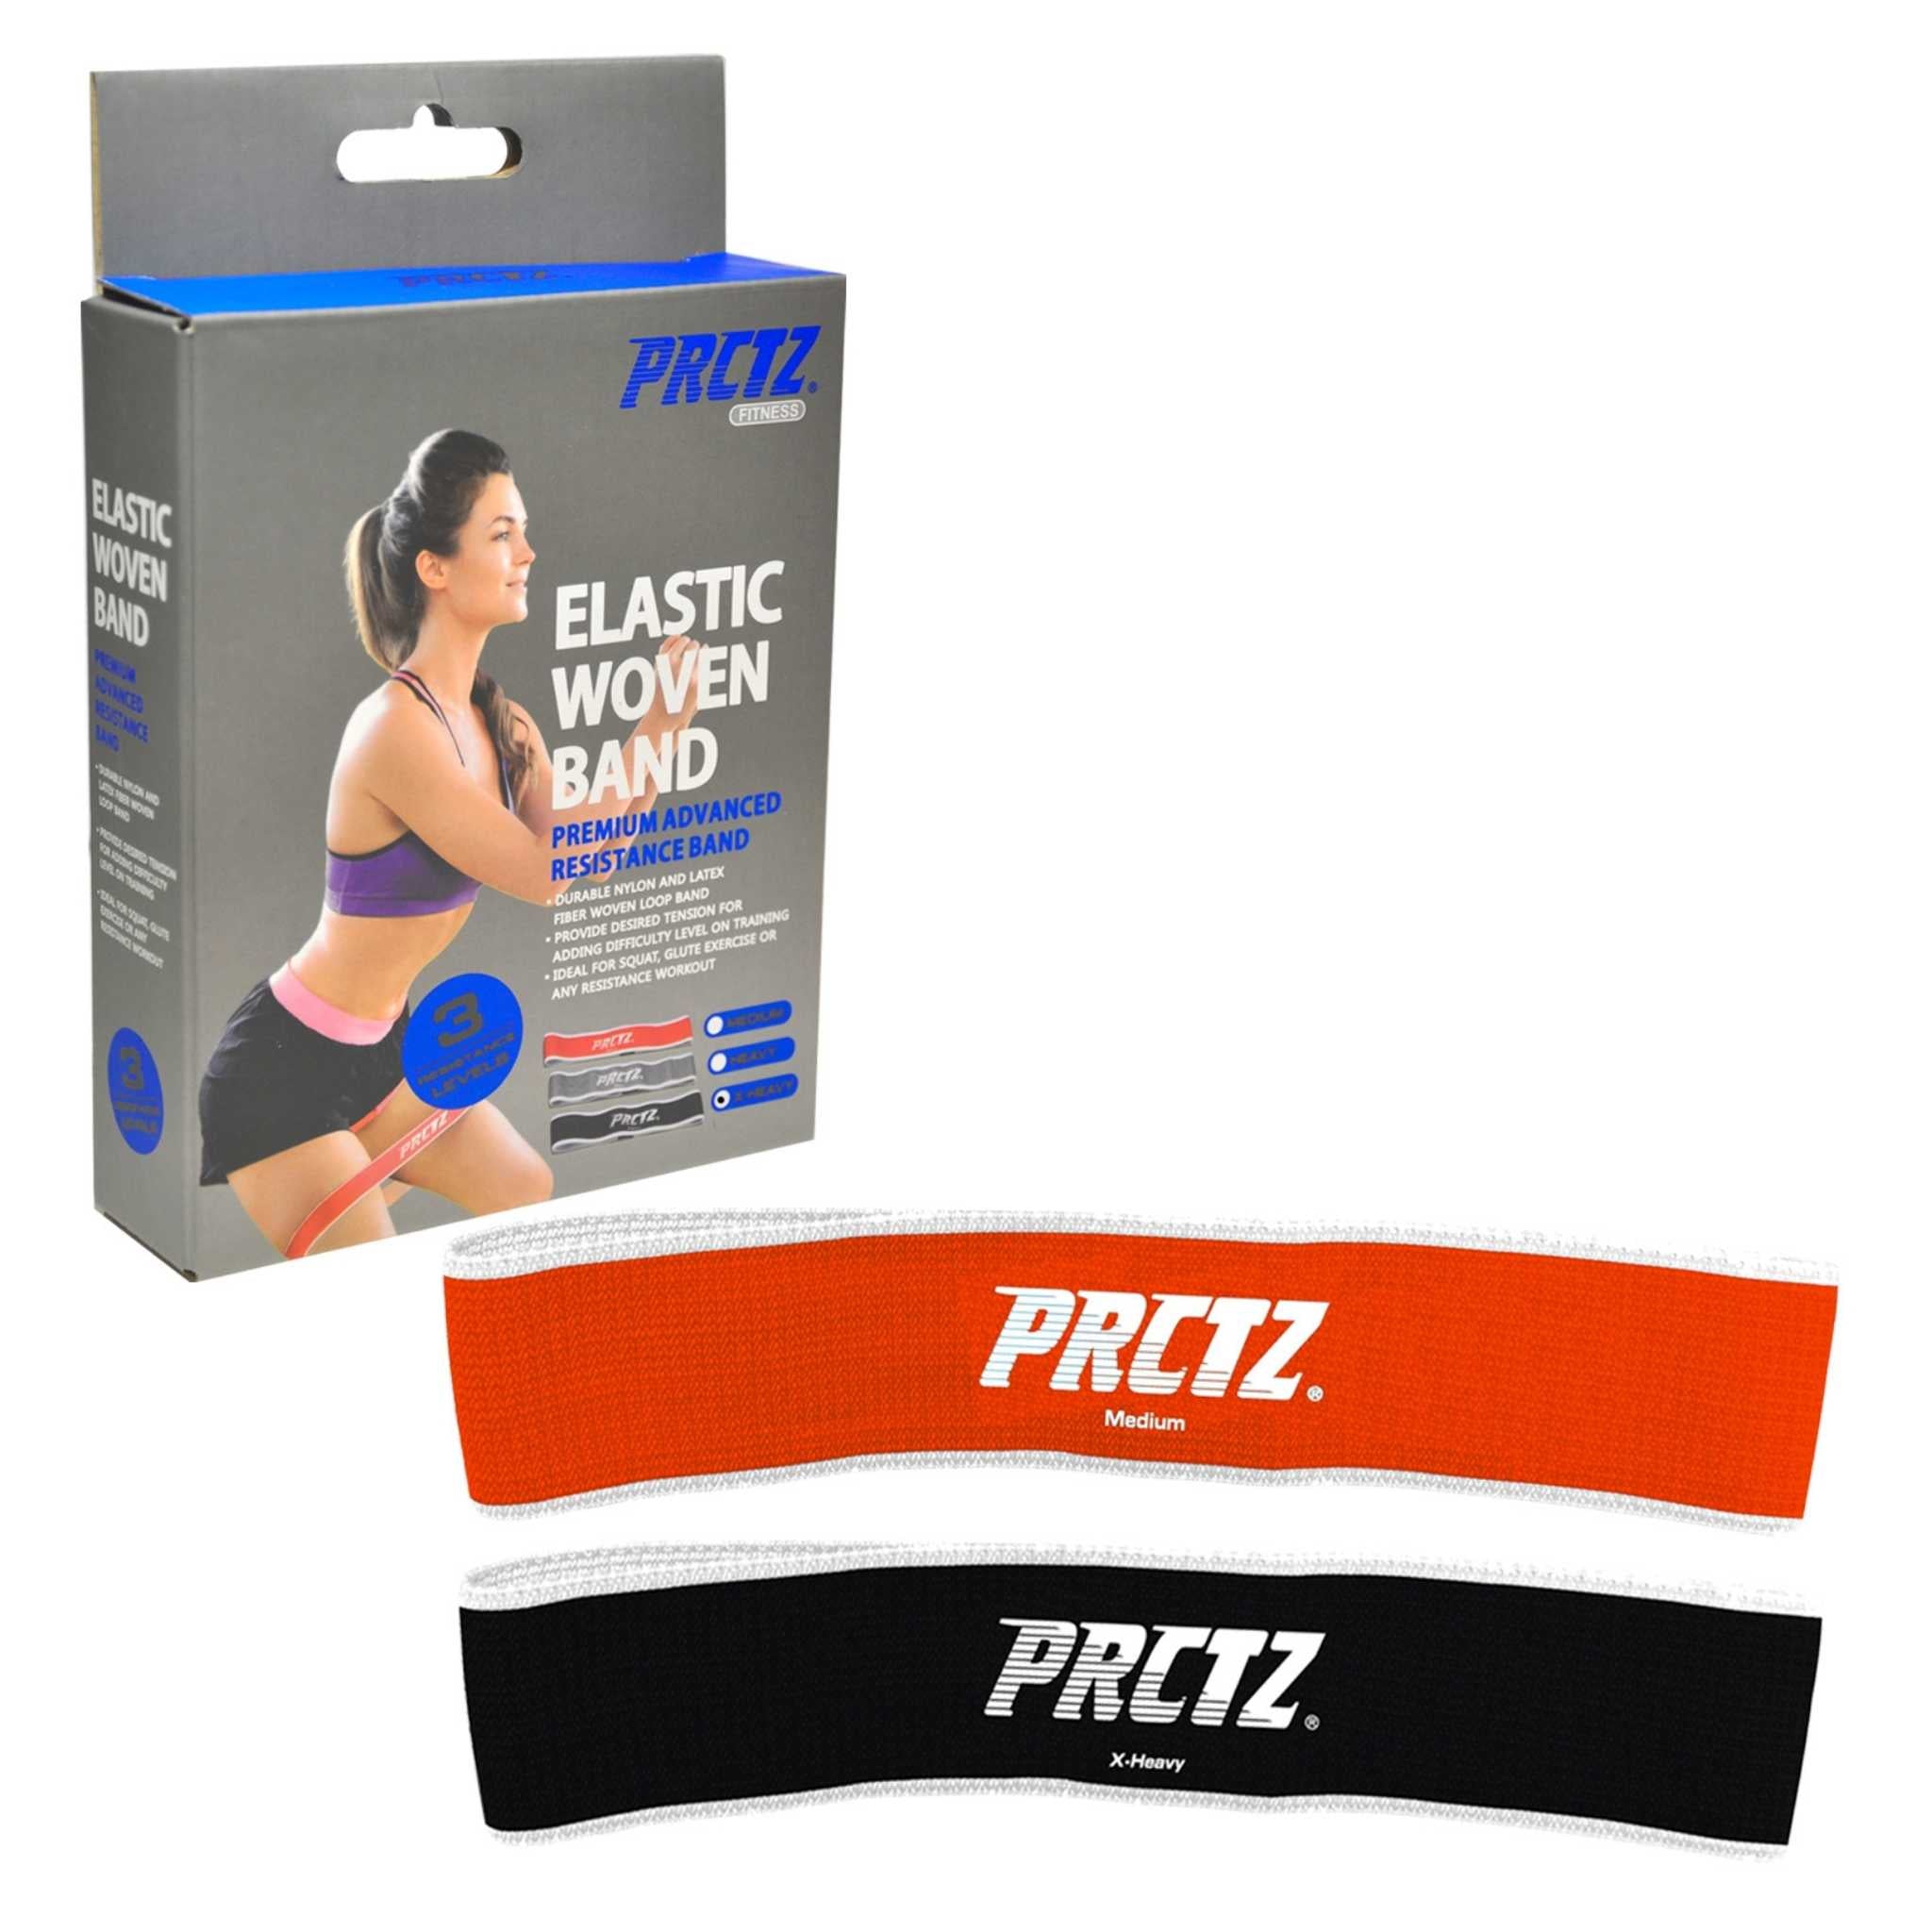 Elastic Woven Resistance Bands, Available in Medium & X-Heavy Resistance